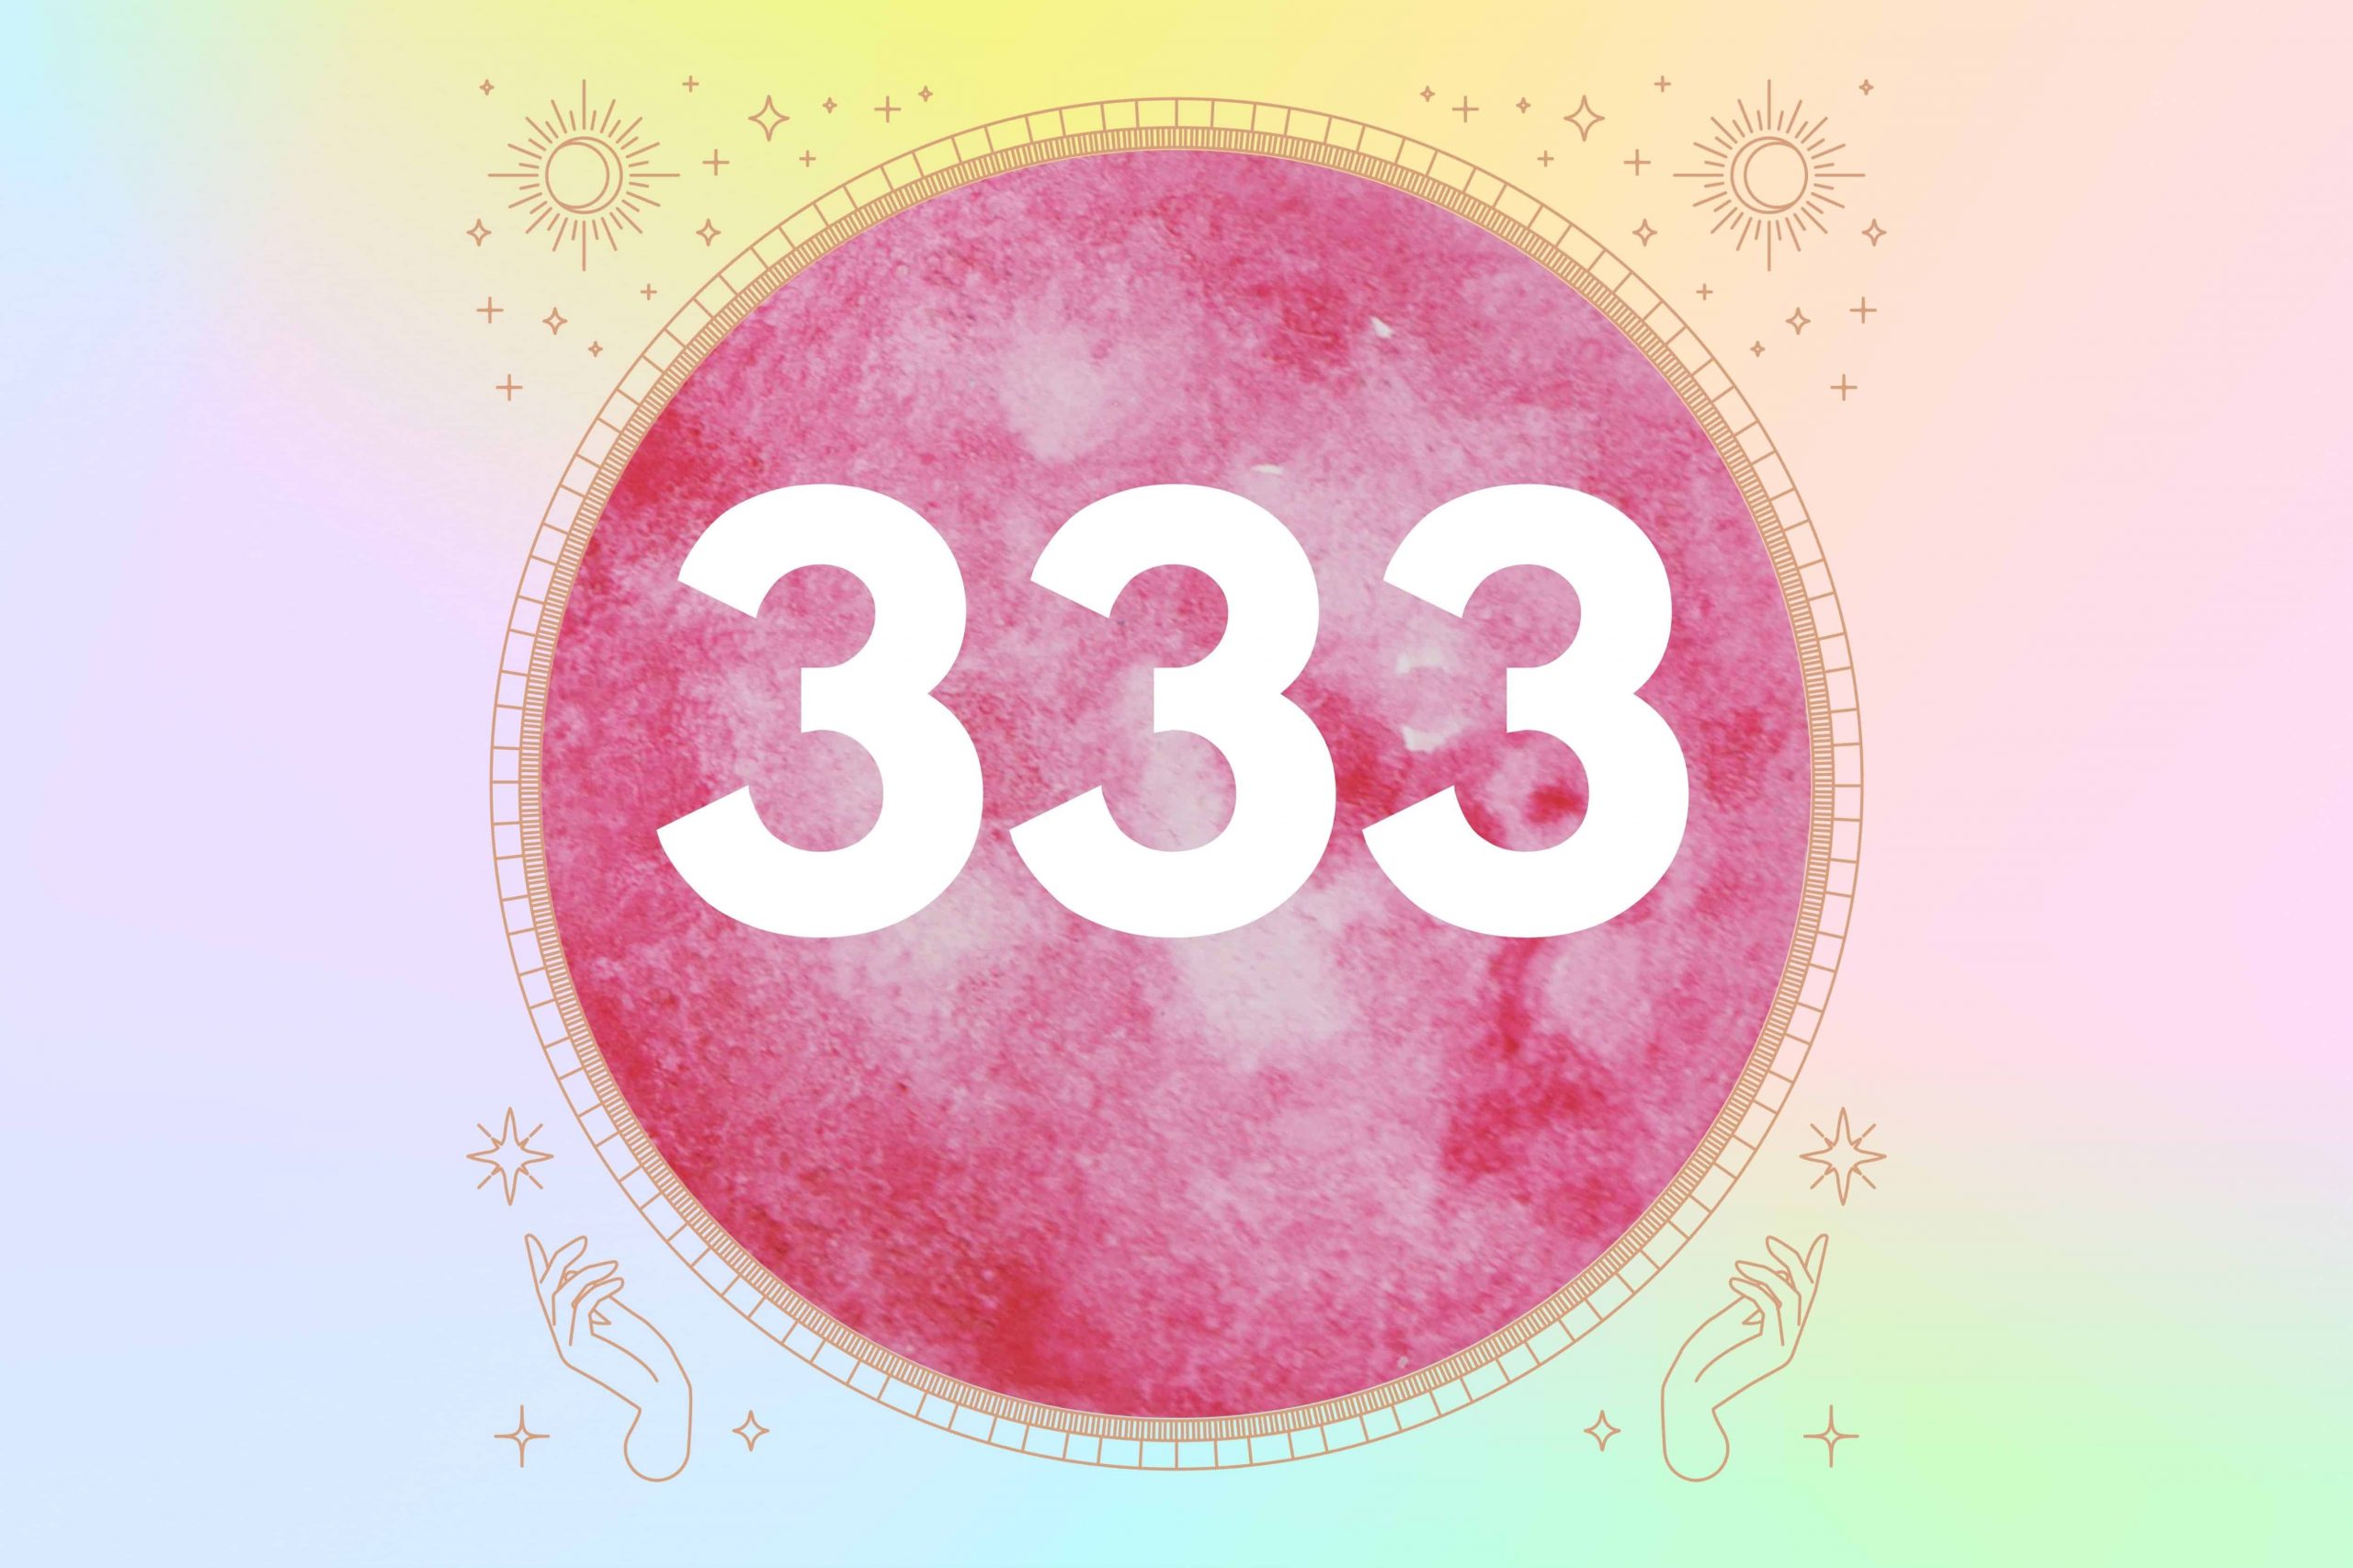 The numbers 333